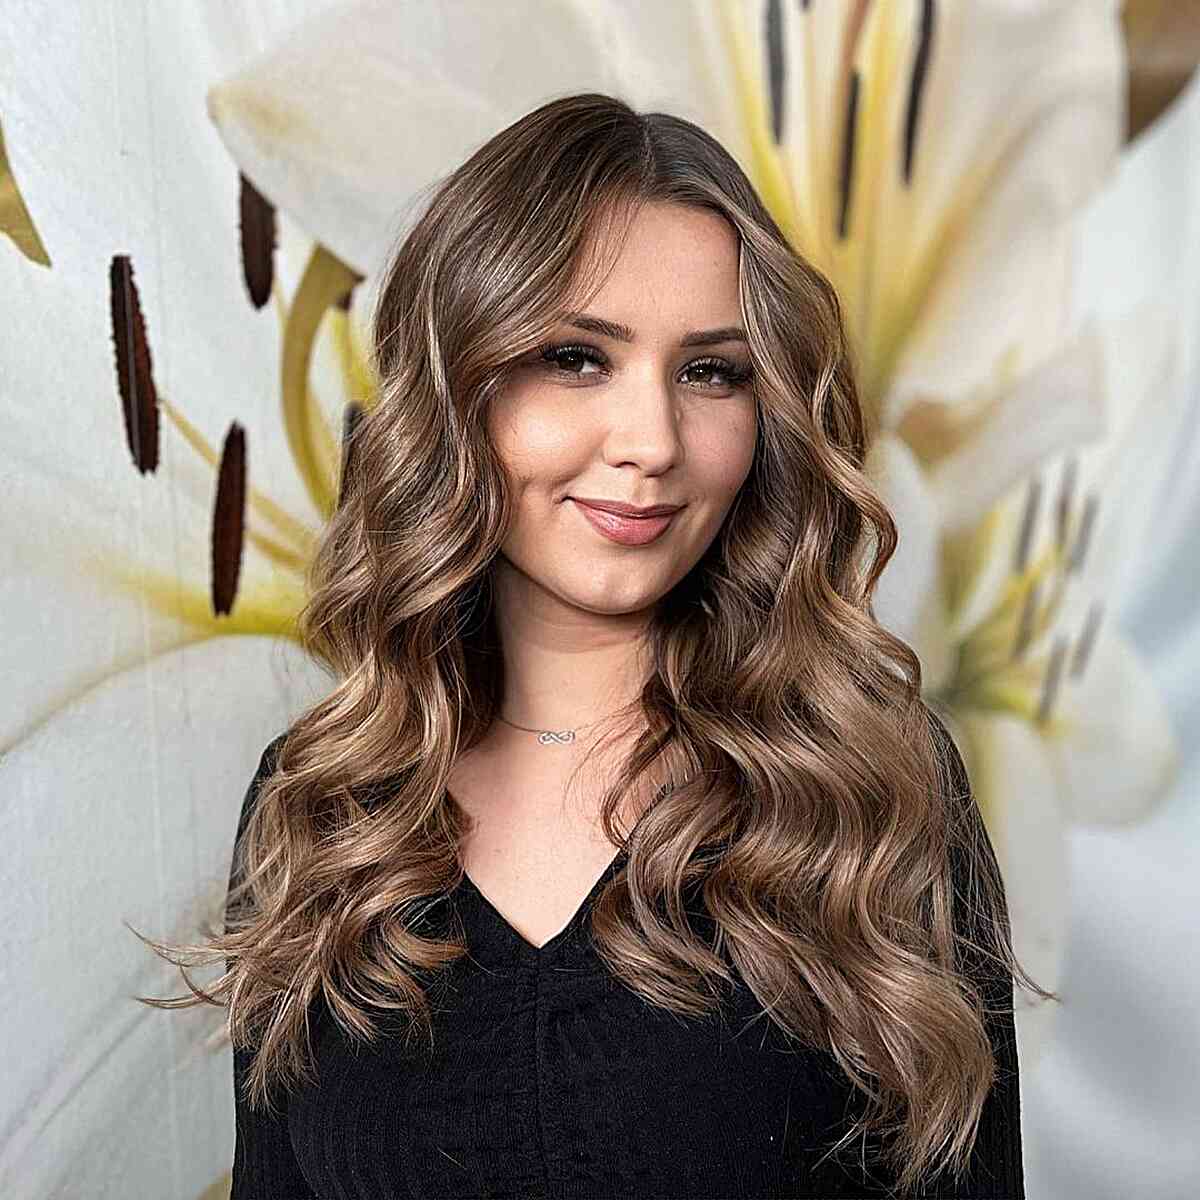 Long Balayage Waves and Middle Part for women with strong cheekbones